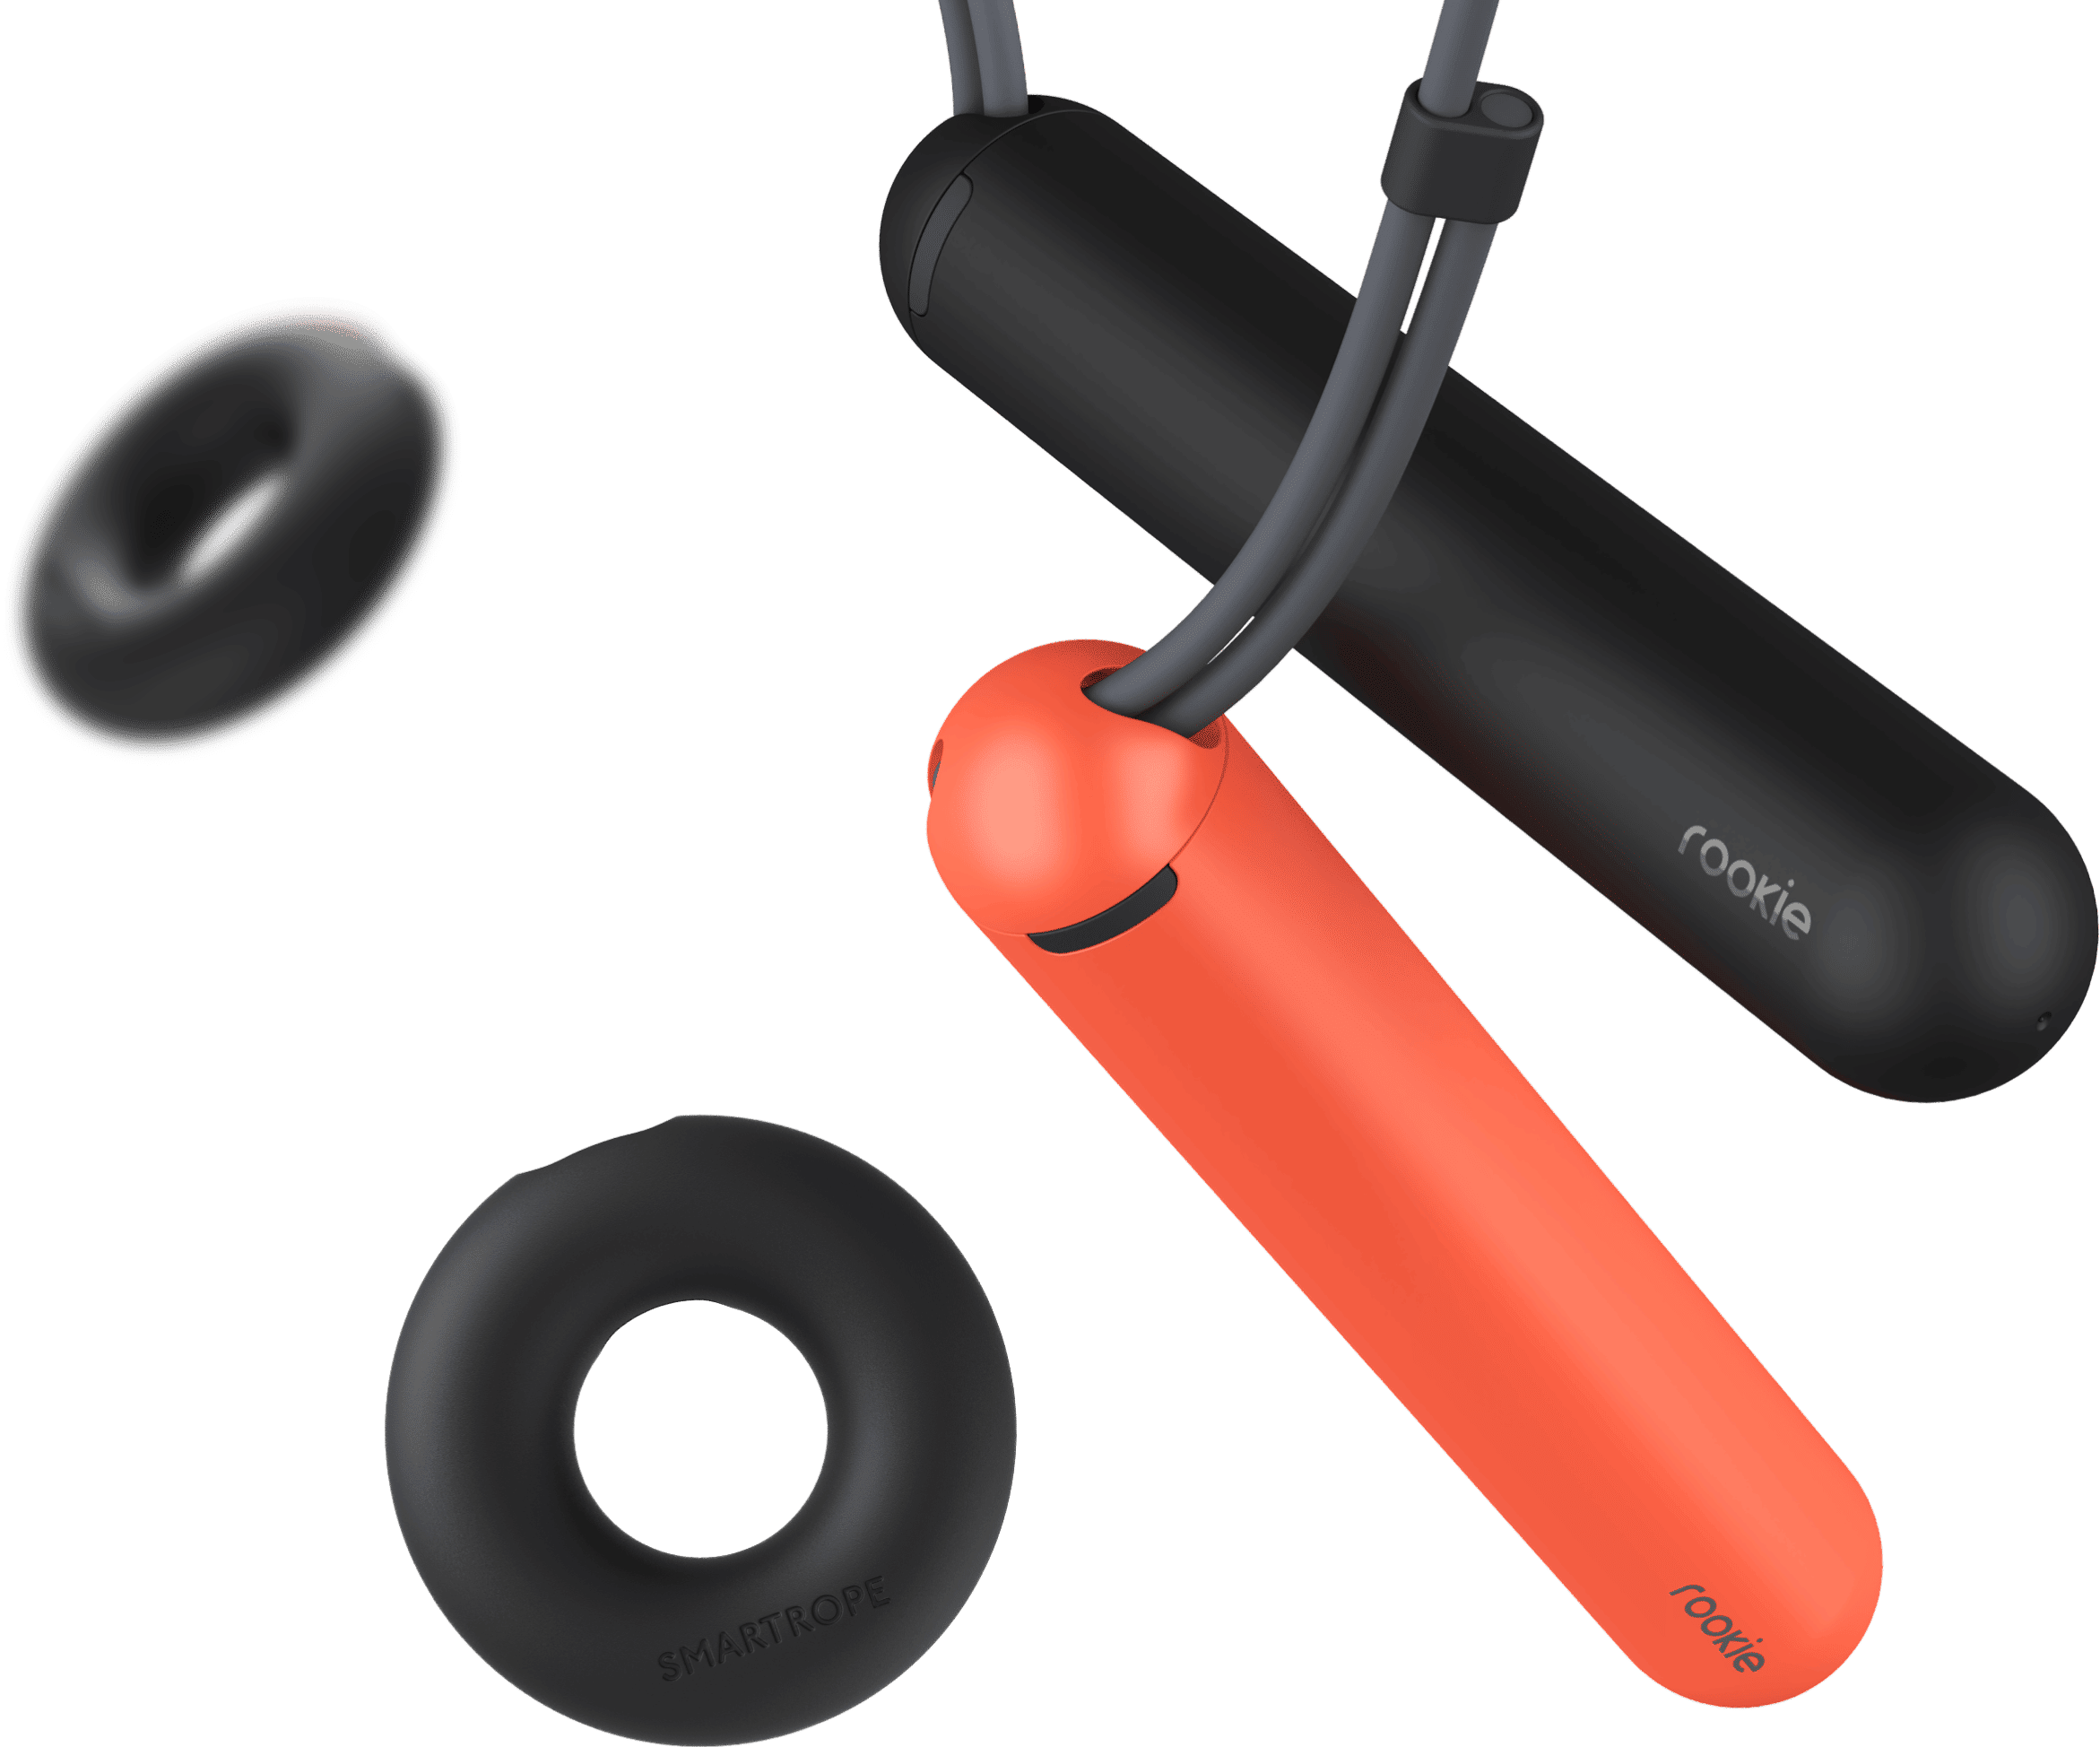 hiit cardio Jump rope Rookie and Donut set